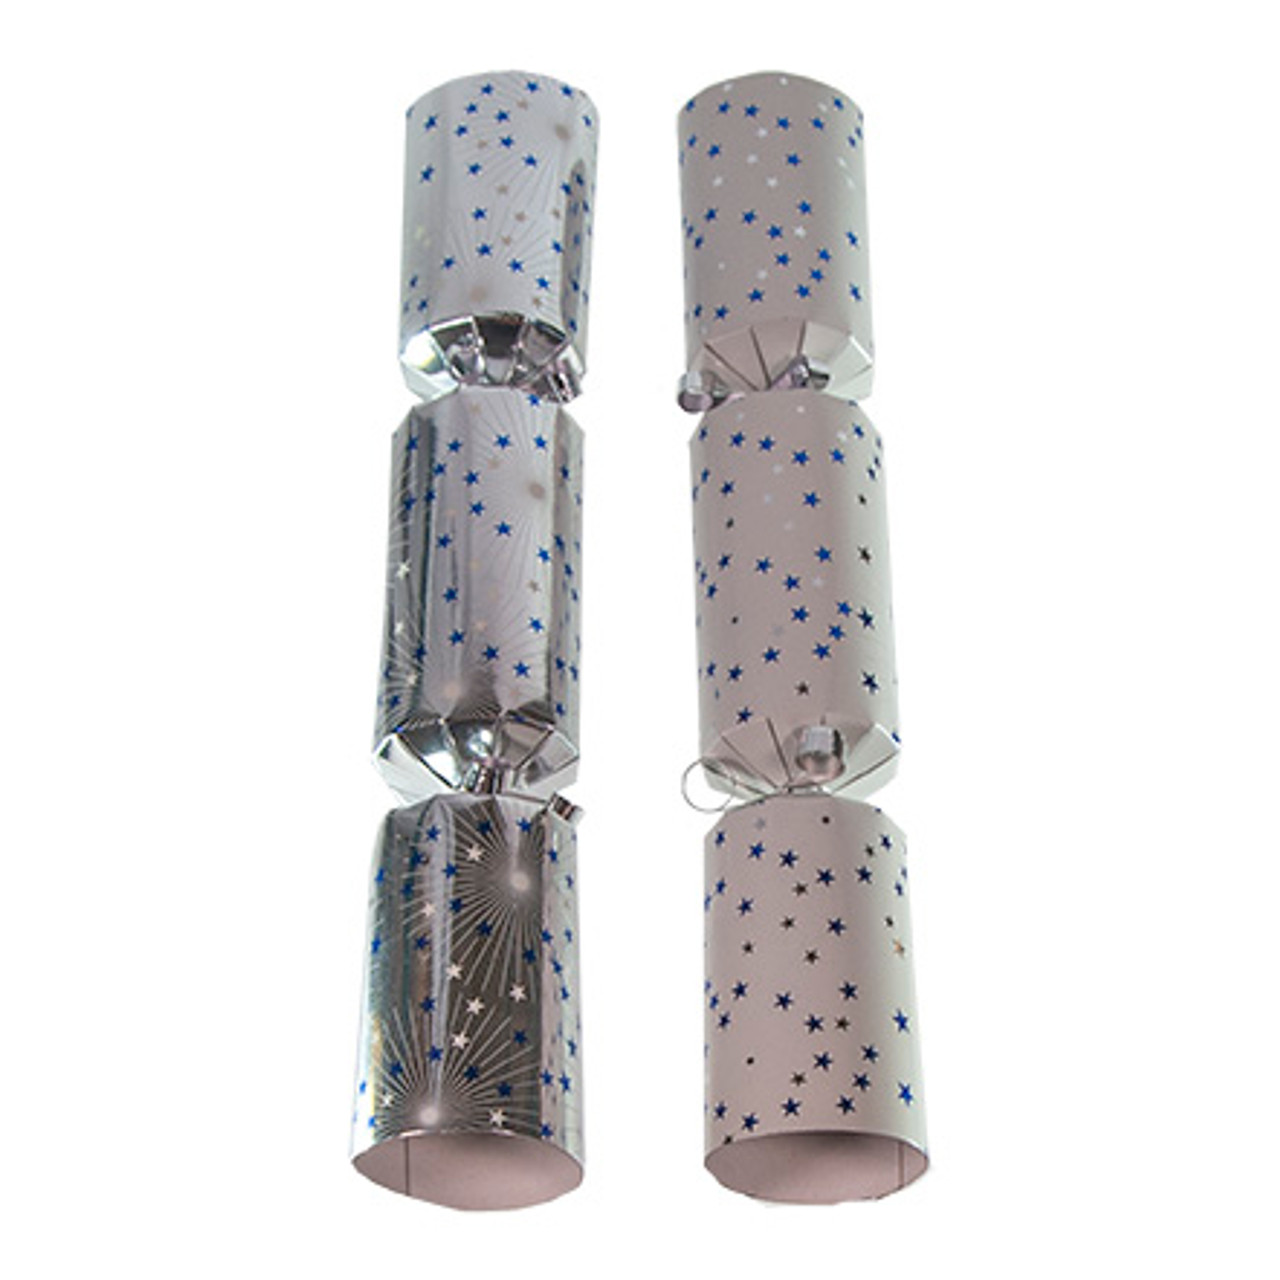 Pack x 10 11" Swantex Christmas Crackers Silver, blue & white Starburst 